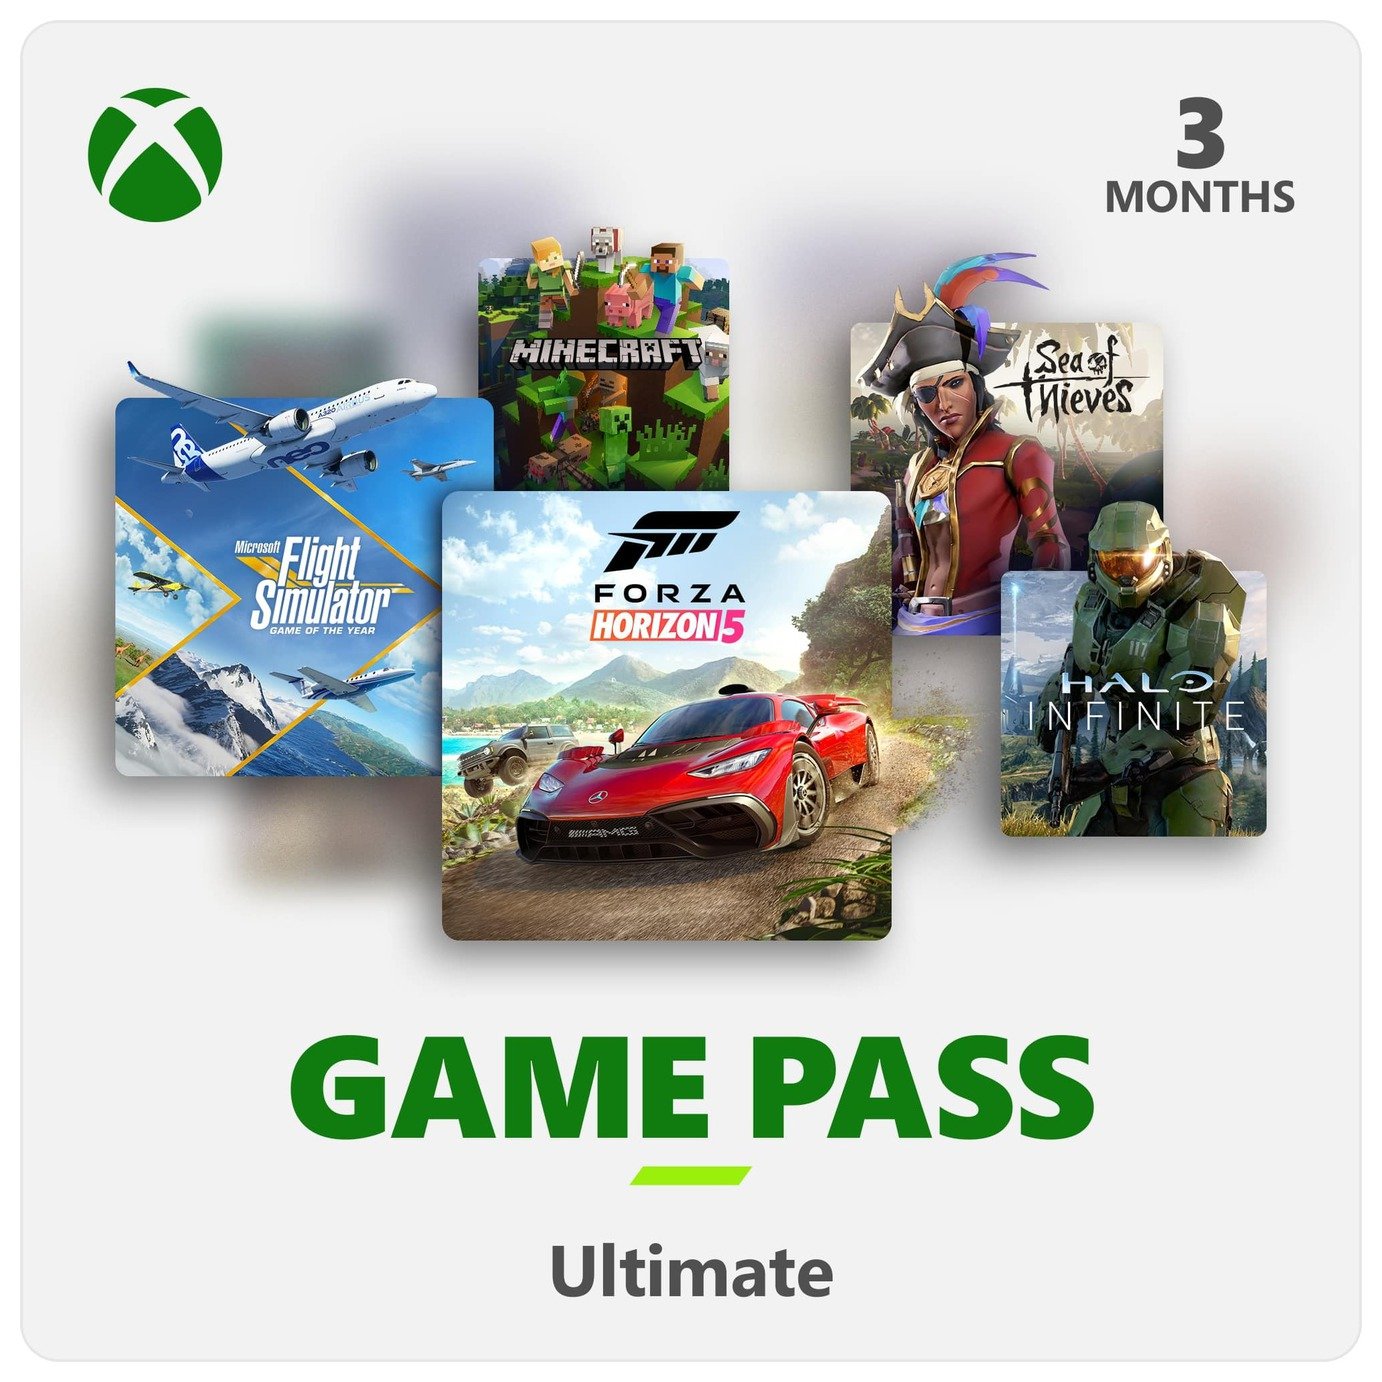 xbox ultimate 3 month